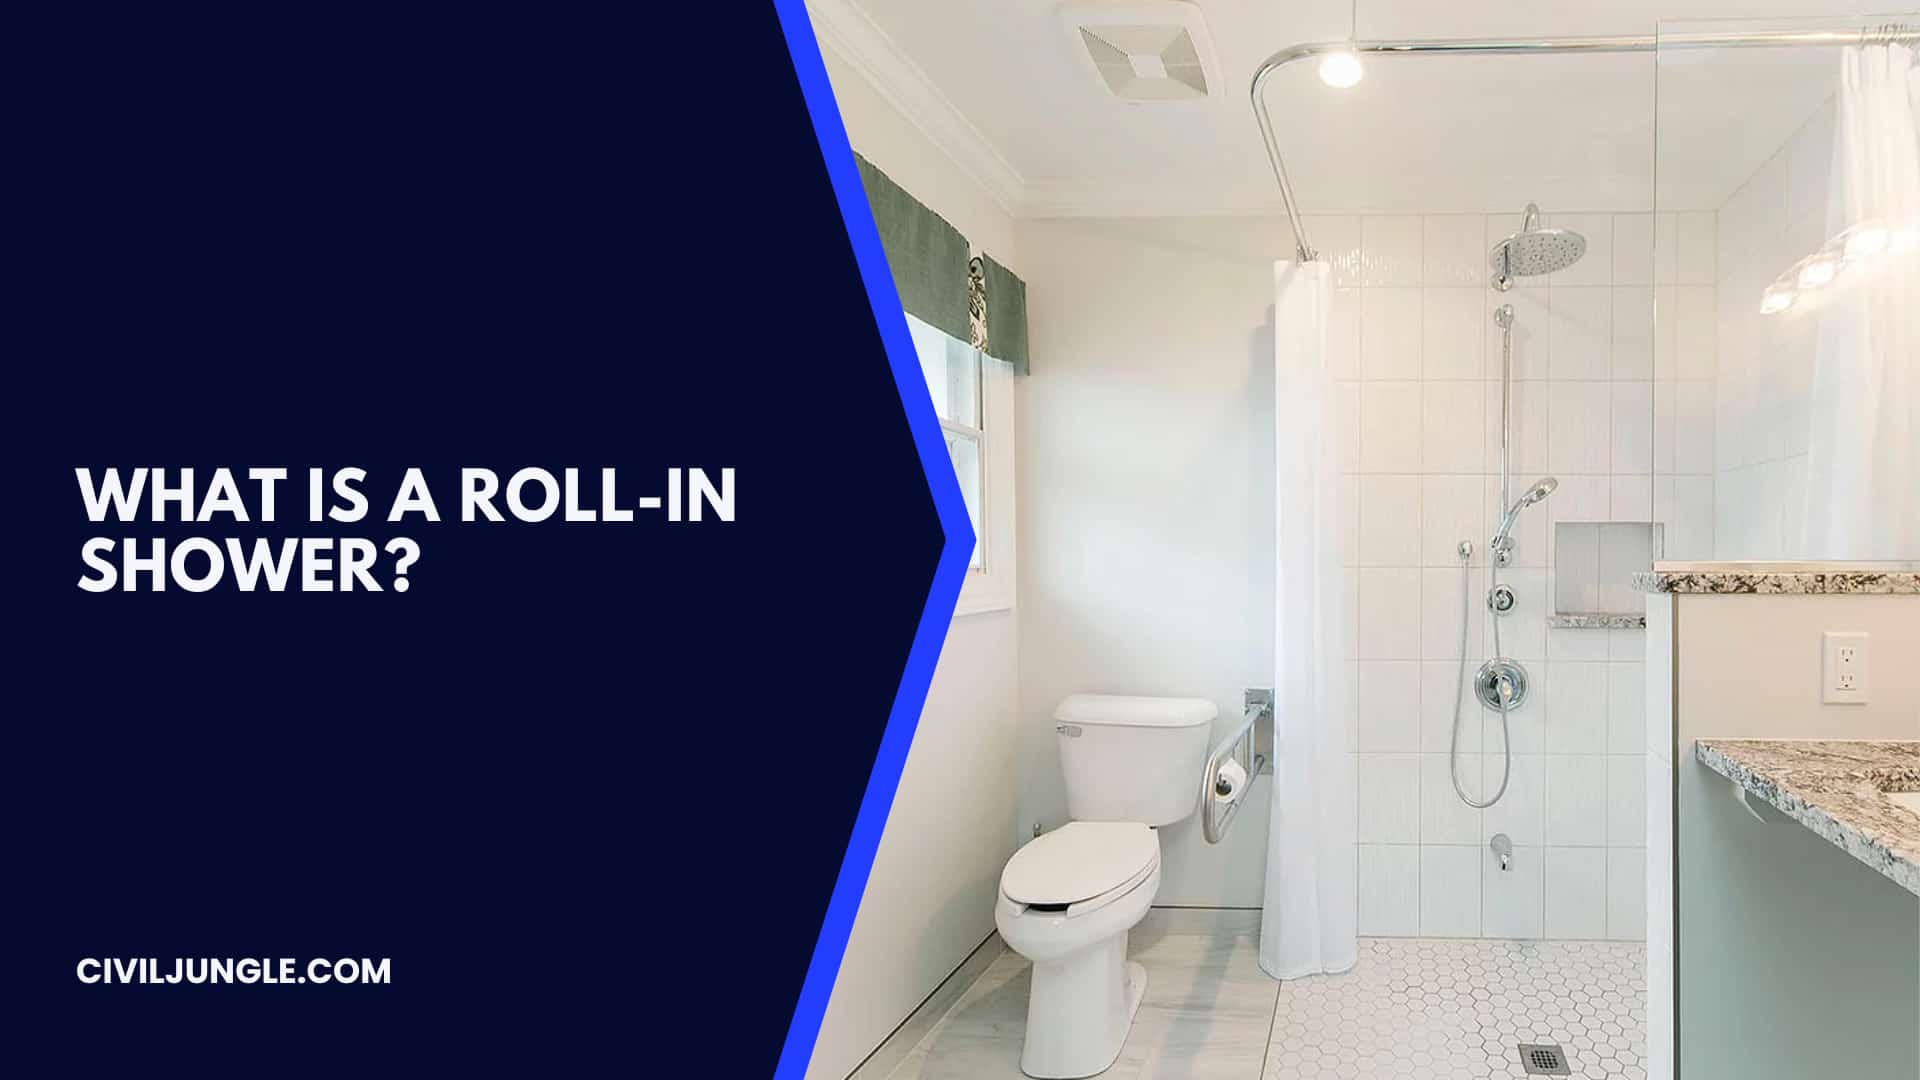 What Is a Roll-in Shower?